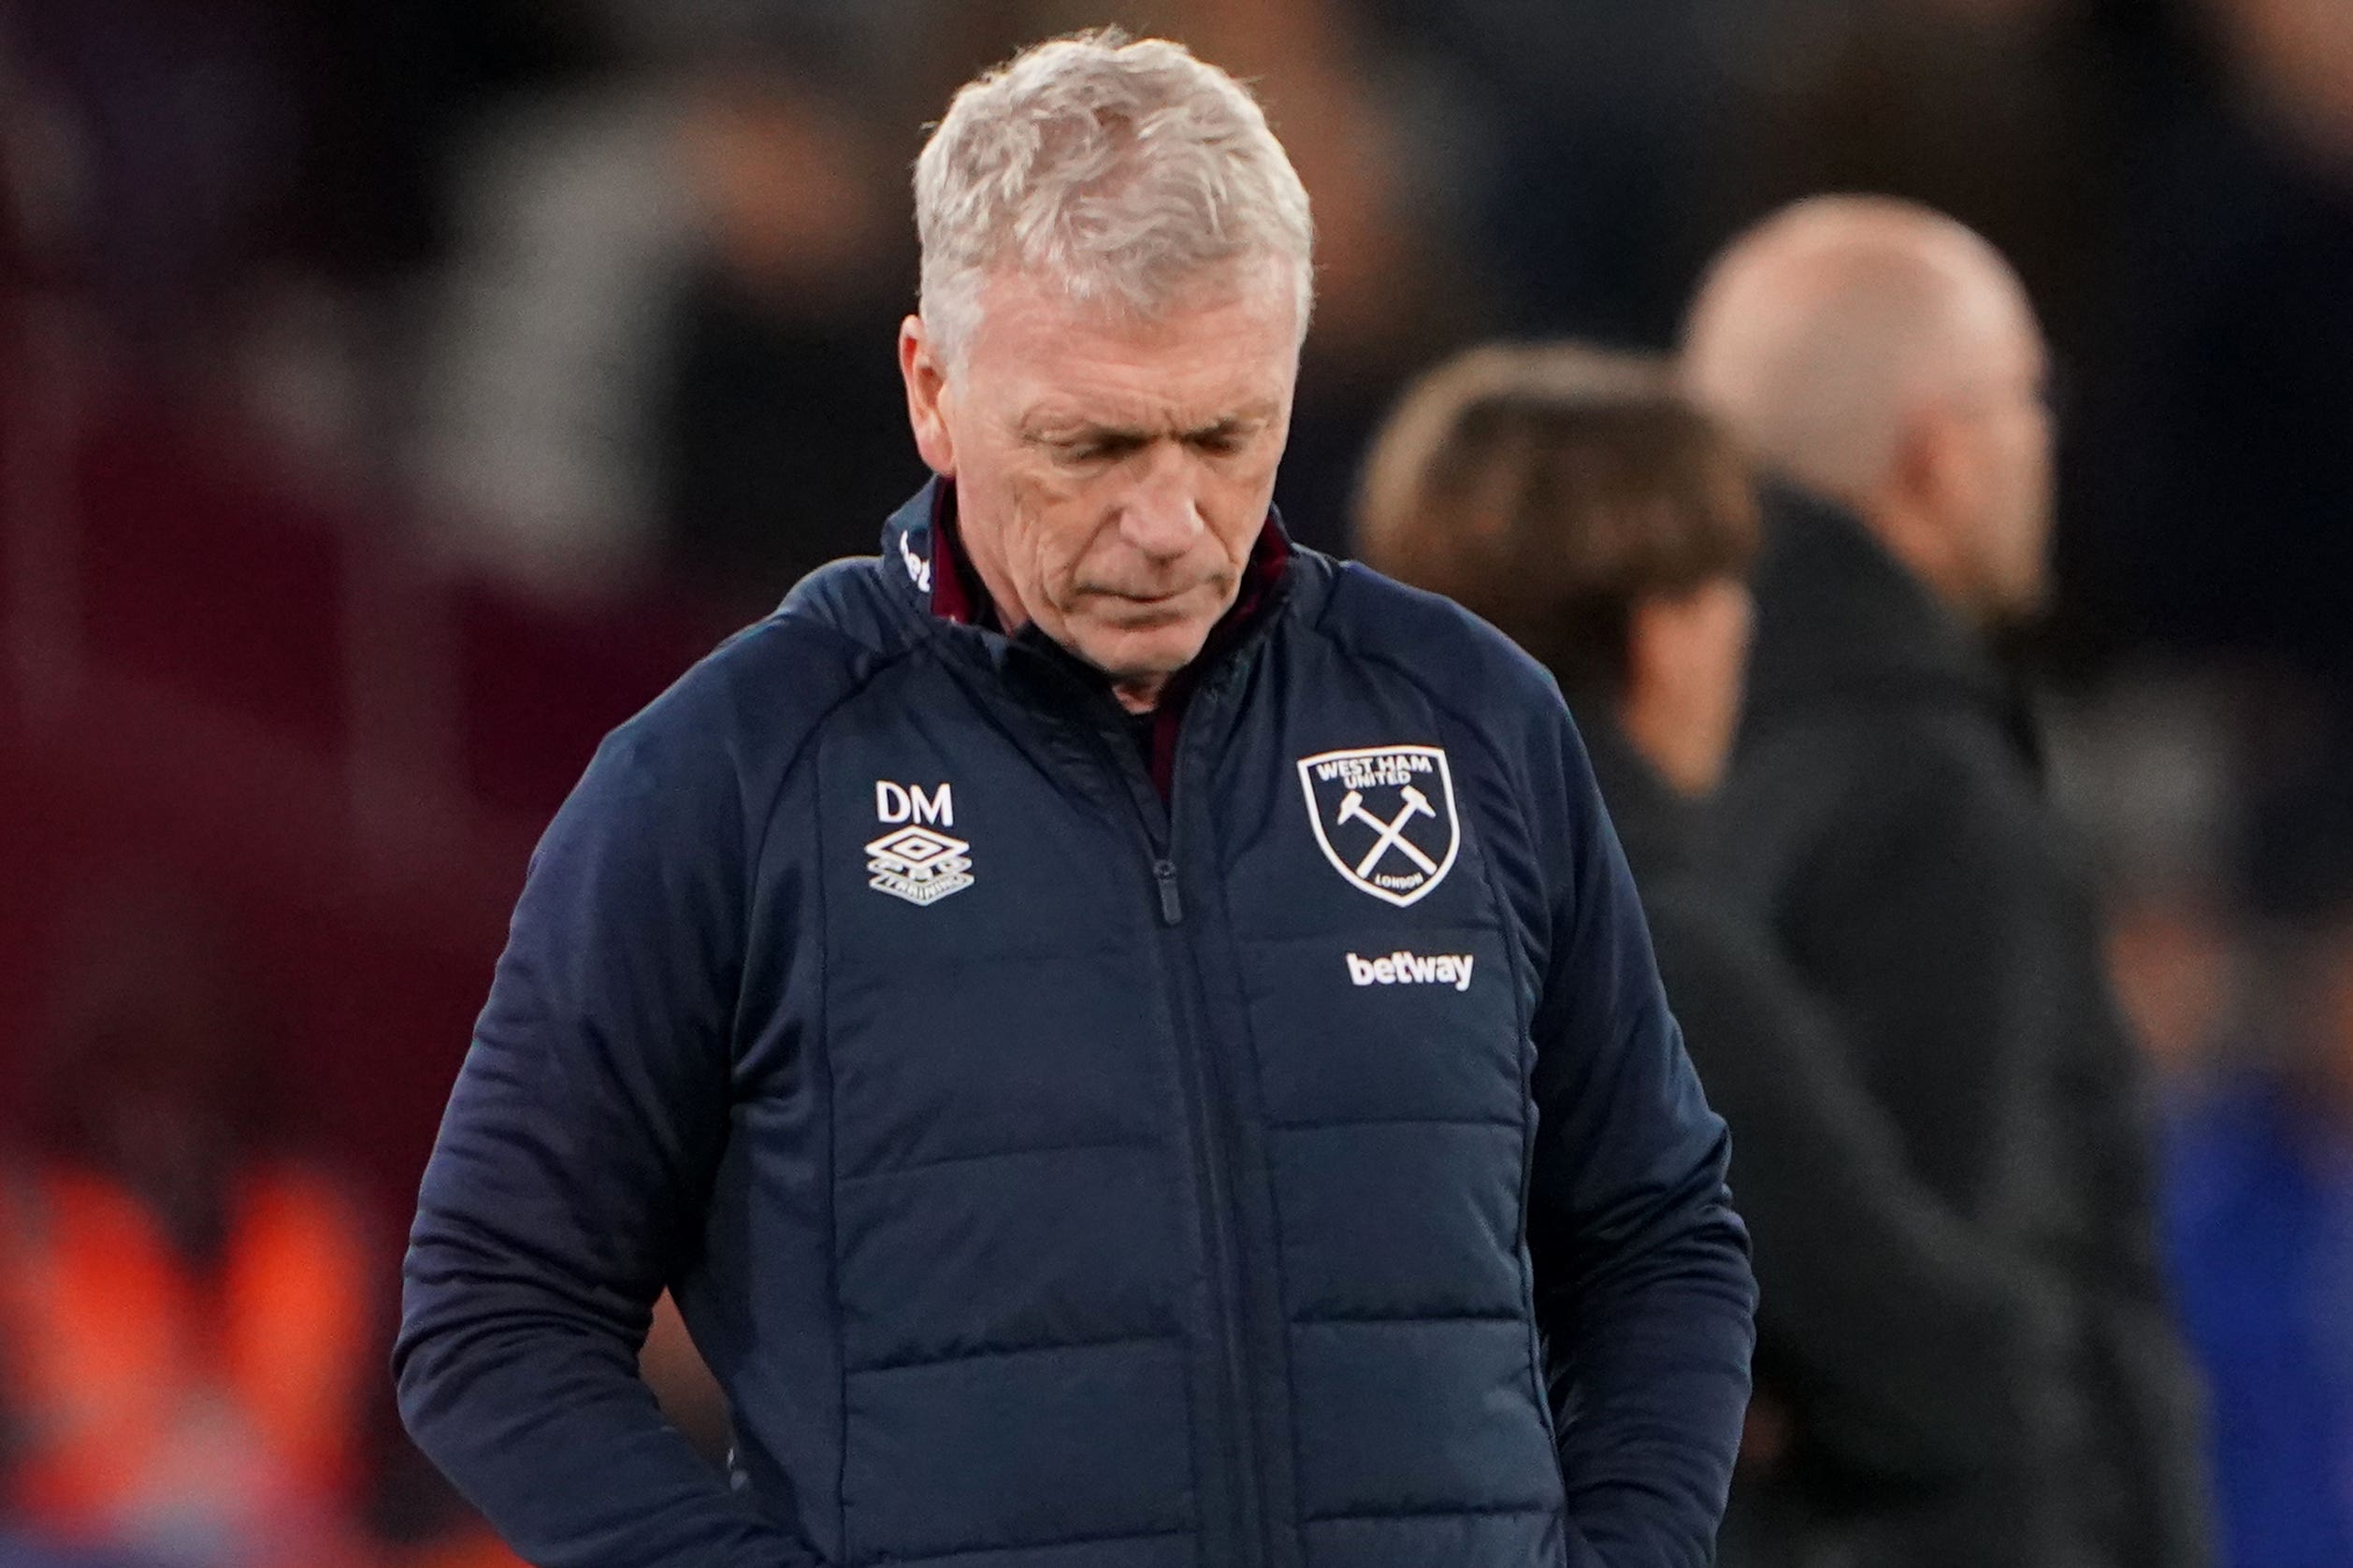 David Moyes accepts he is under pressure following West Ham’s defeat by Brentford (Zac Goodwin/PA)